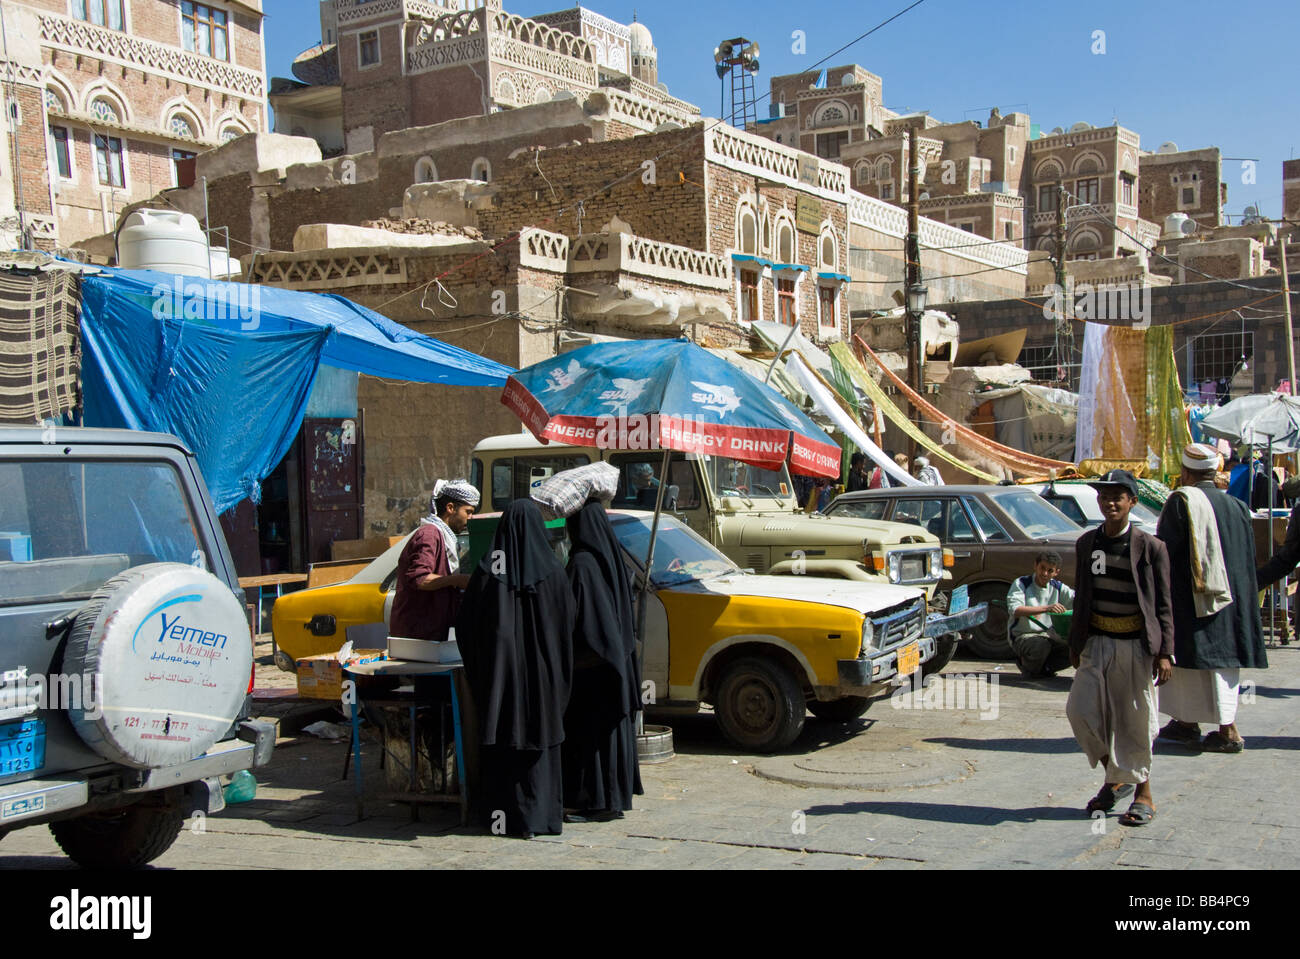 Market scene in the old town district of Sana'a Yemen Stock Photo